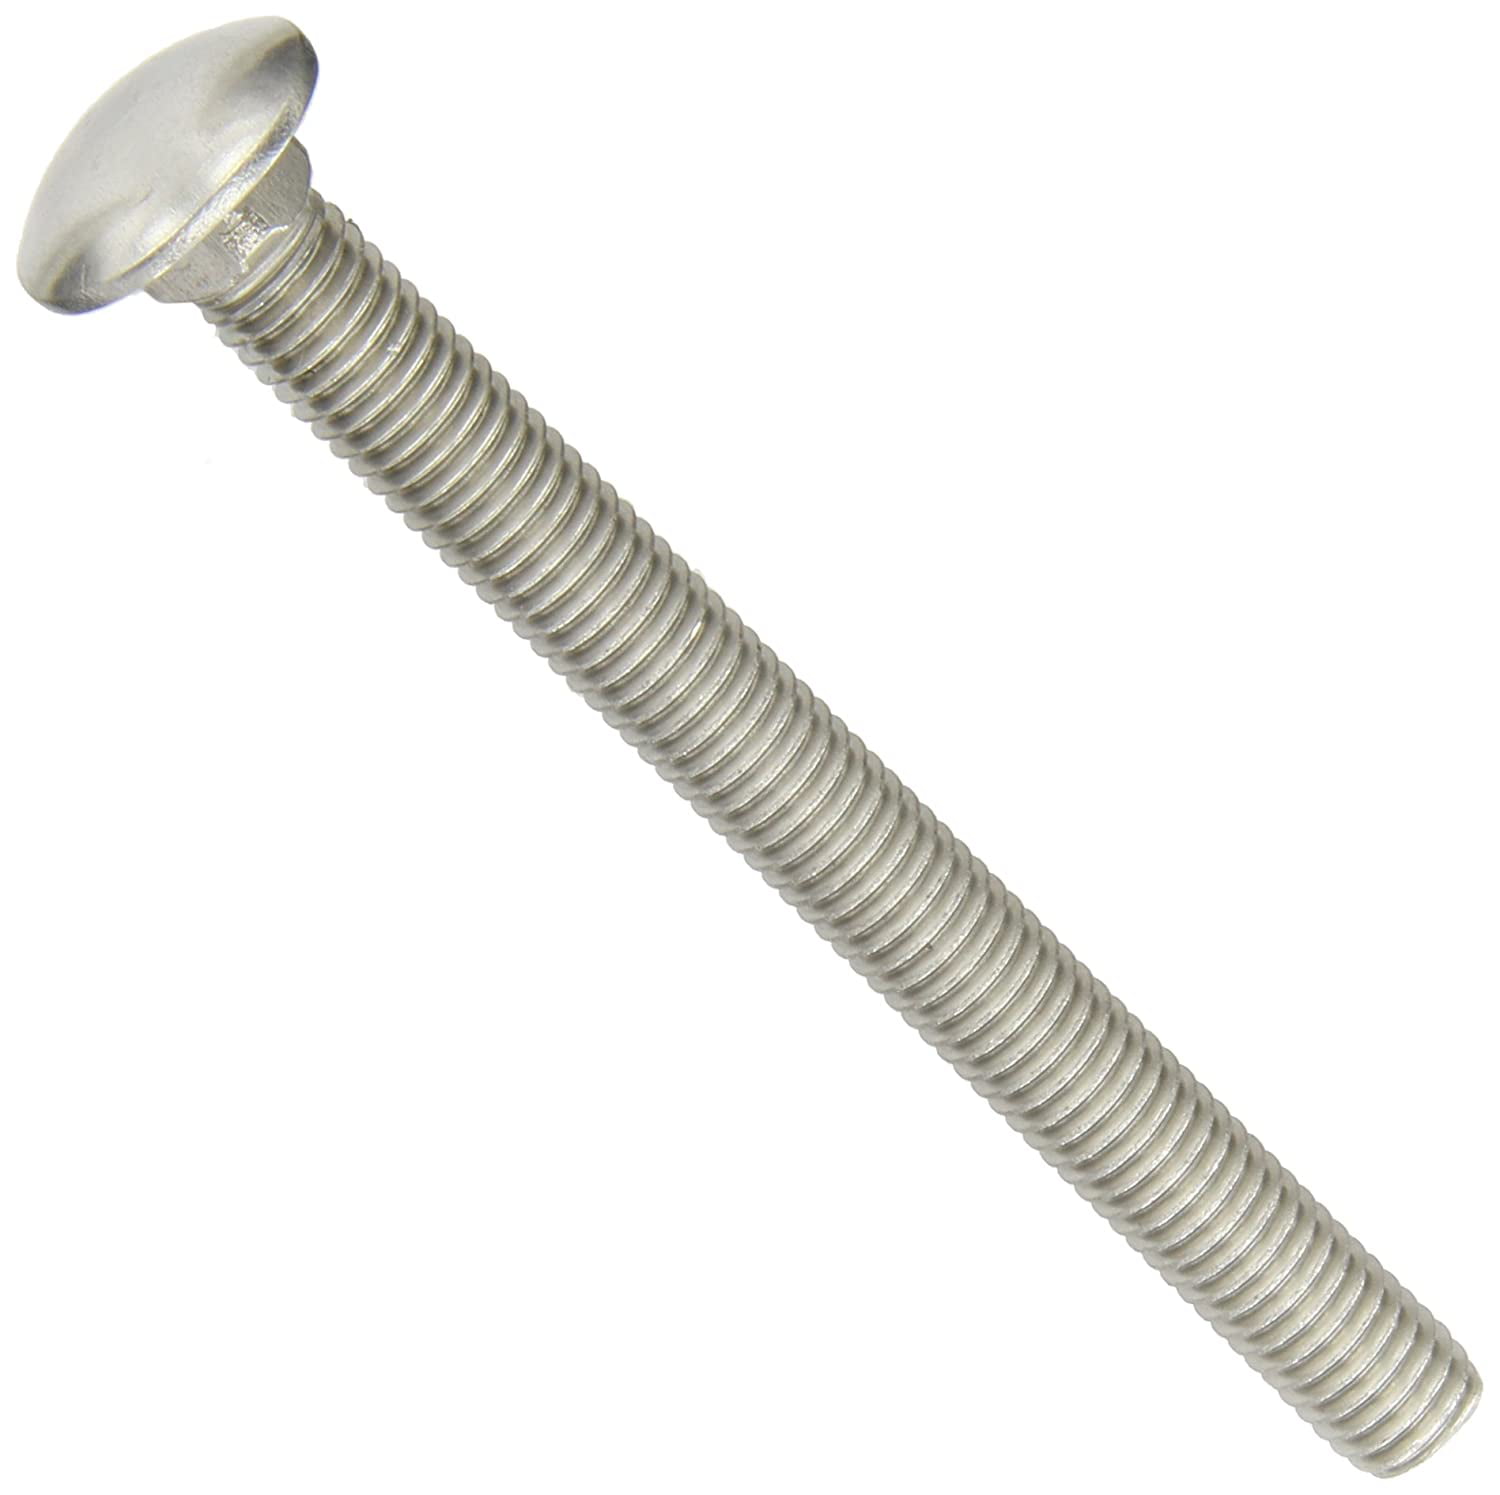 1/2-13 X 3 18-8 Stainless Steel 10pc Stainless Carriage Bolt